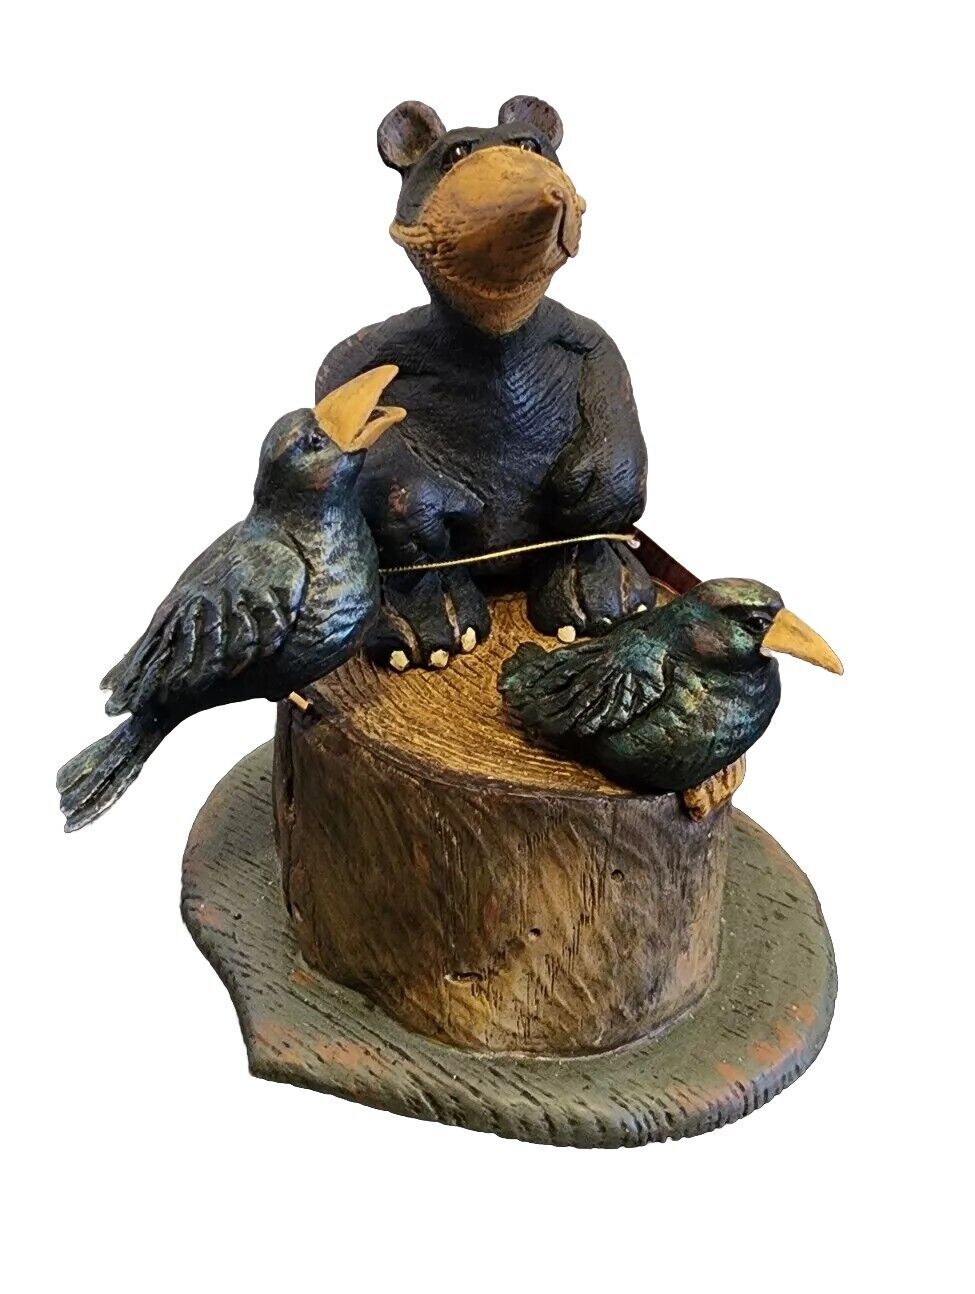 American Chestnut 2000 Petey Bear On Stump With Crows AM1113 Birds of a Feather